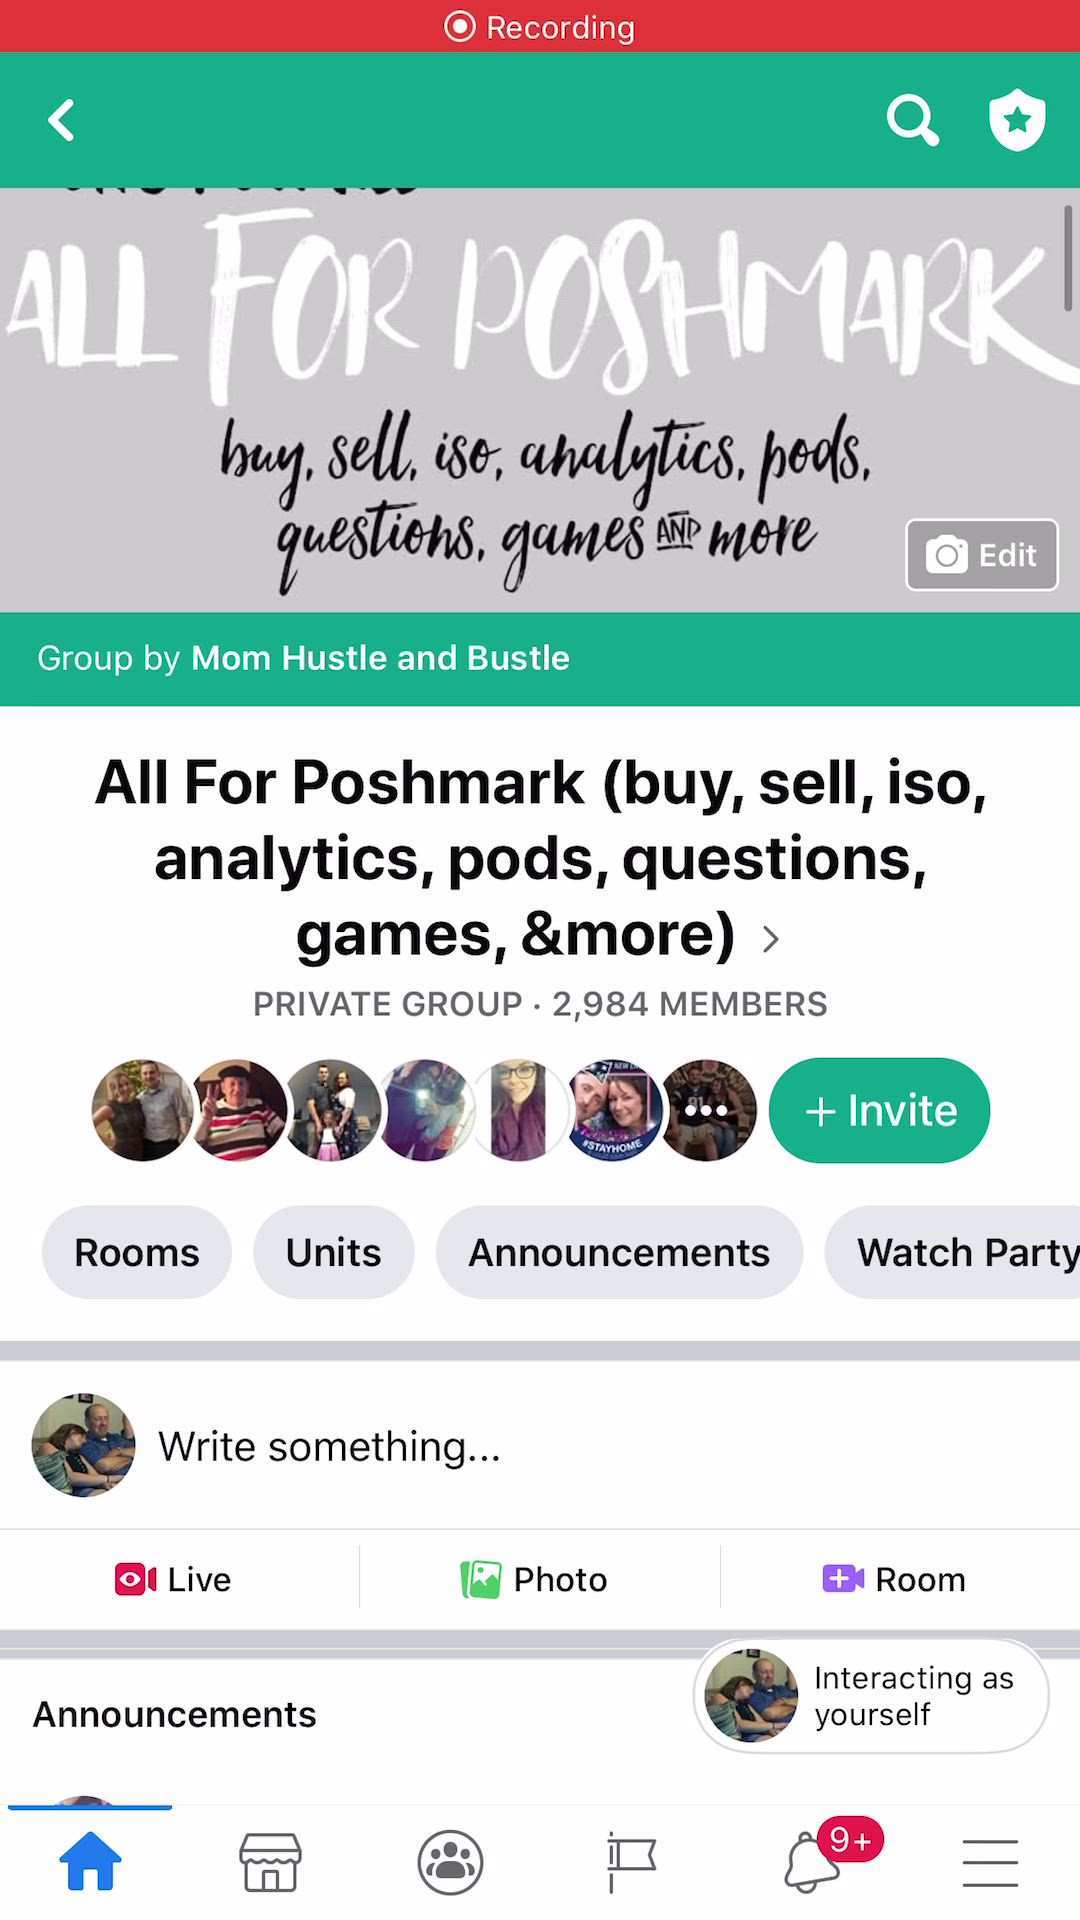 All For Poshmark Facebook Group Video In 2020